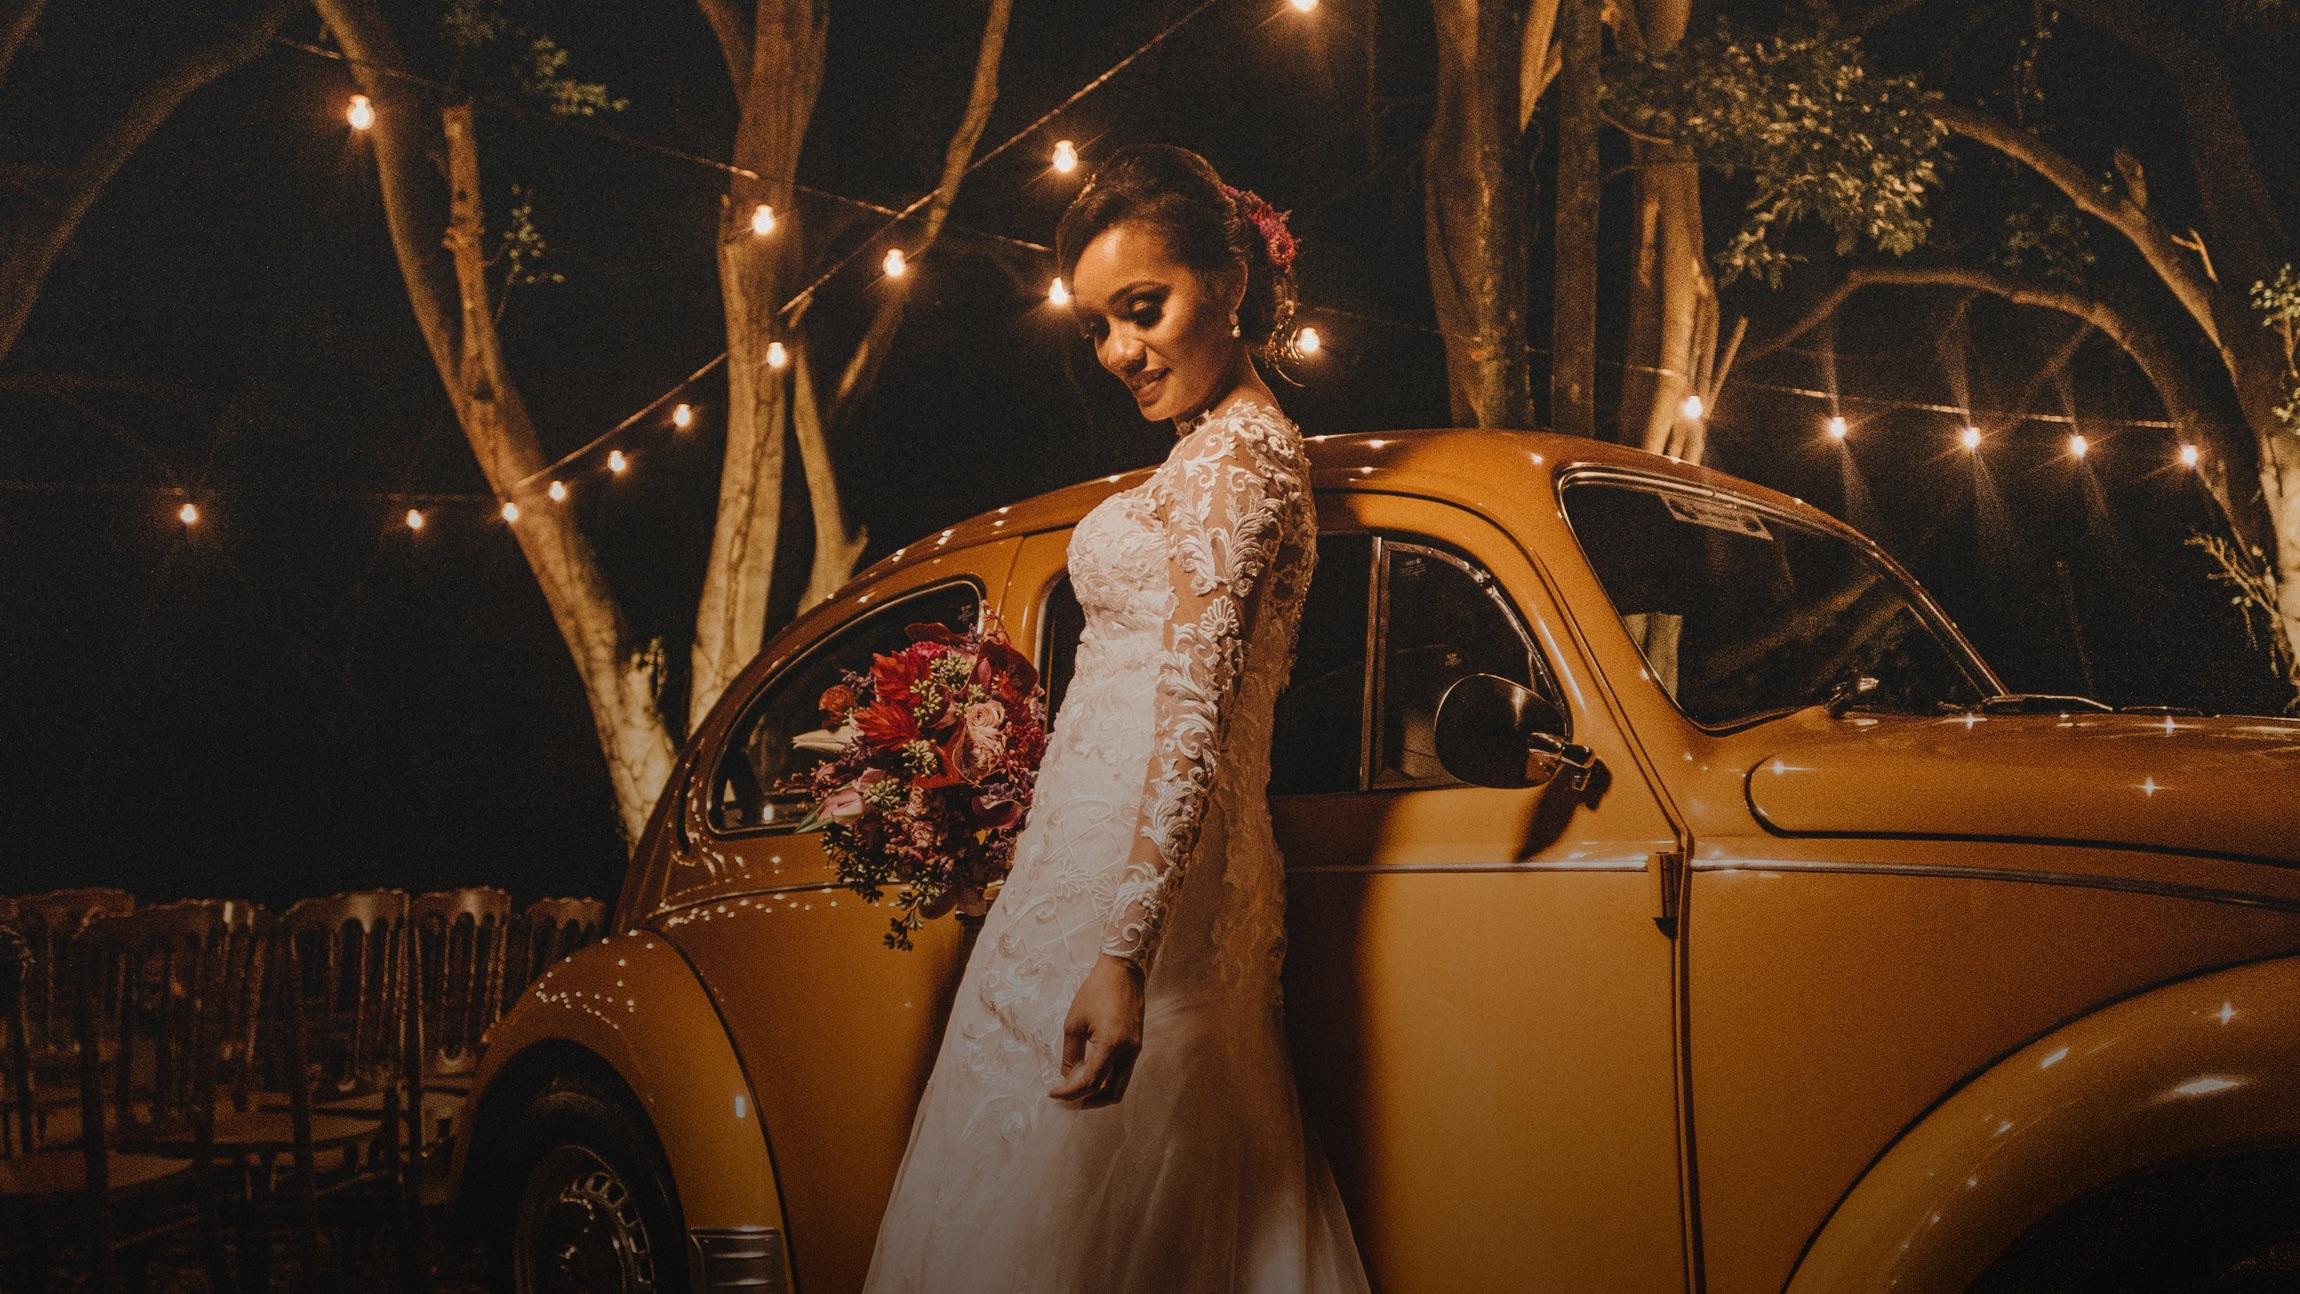 Photo of a woman in a wedding dress, standing next do a Volkswagen Bug